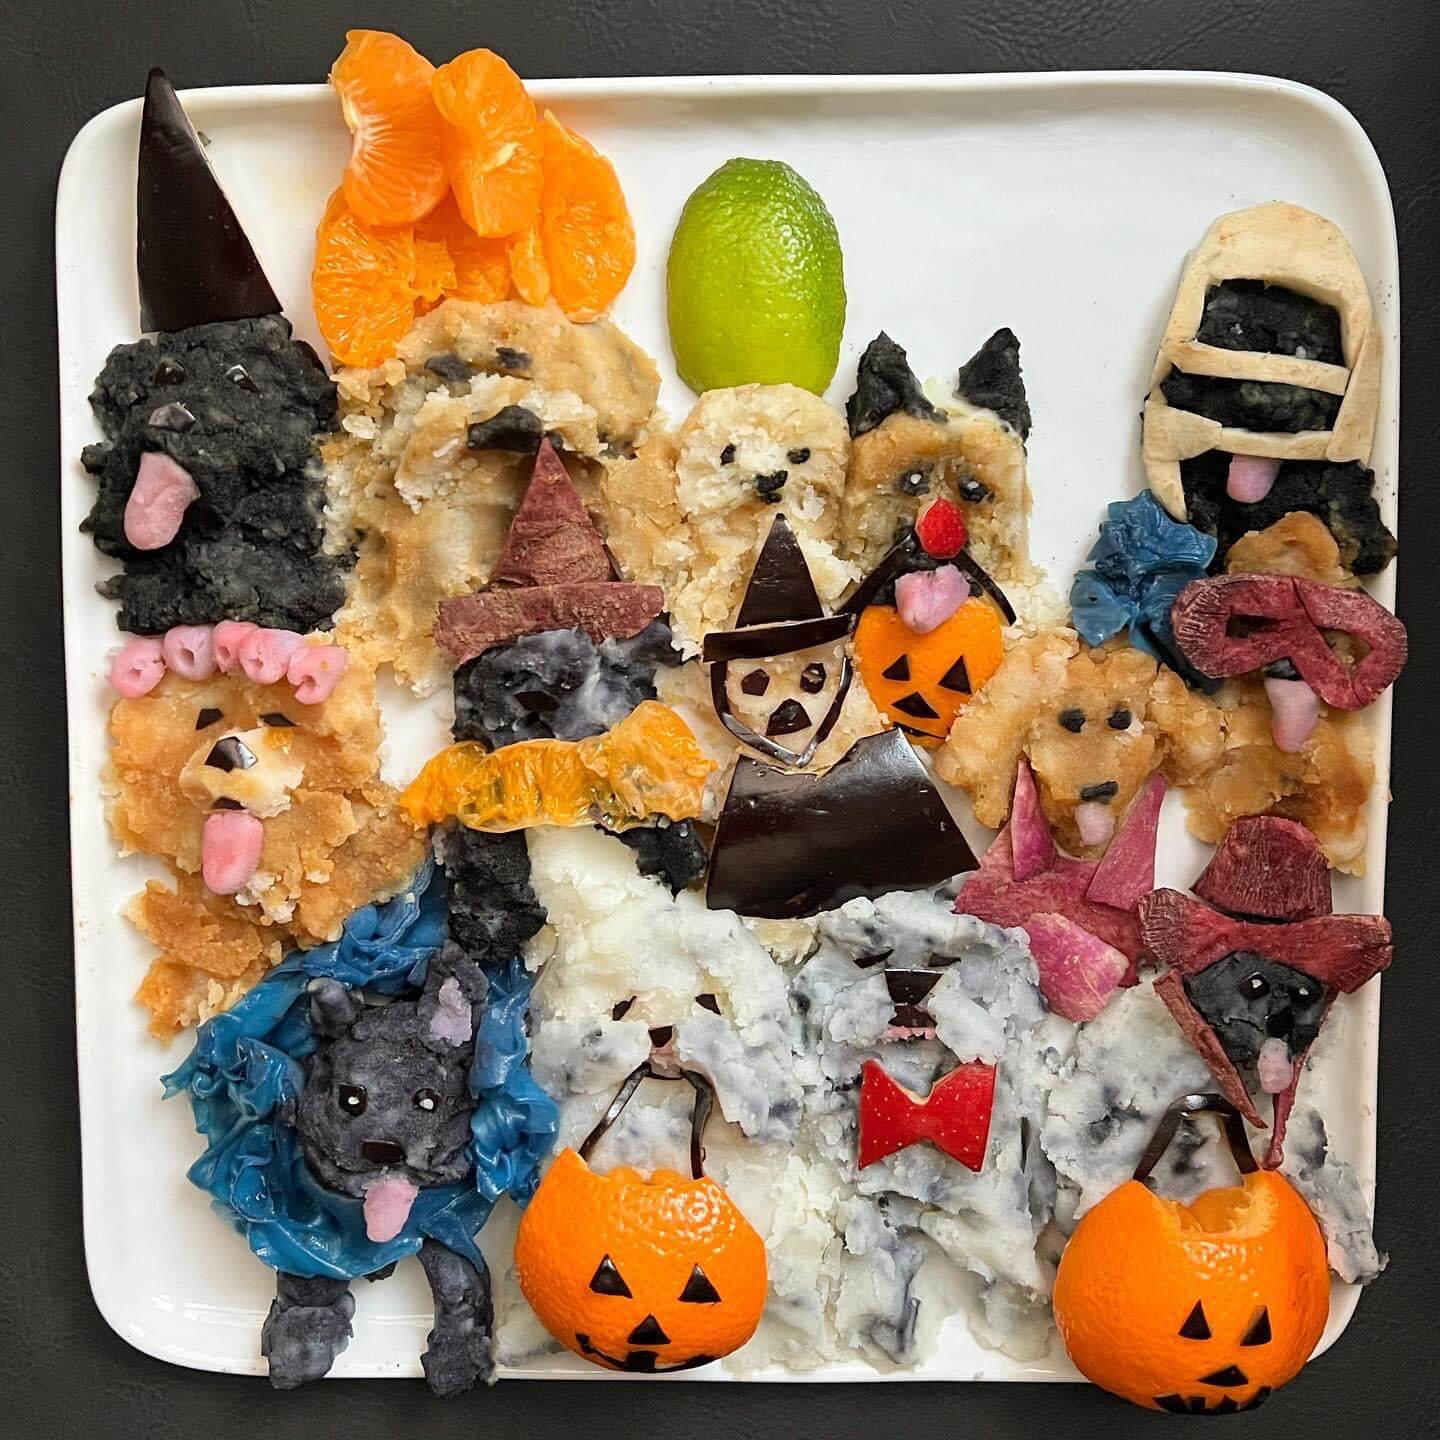 A pack of trick-or-treating dogs food art made from mashed potatoes, purple yams, clementines, eggplant, turnip, apple, rice paper, and lime, by Harley Langberg